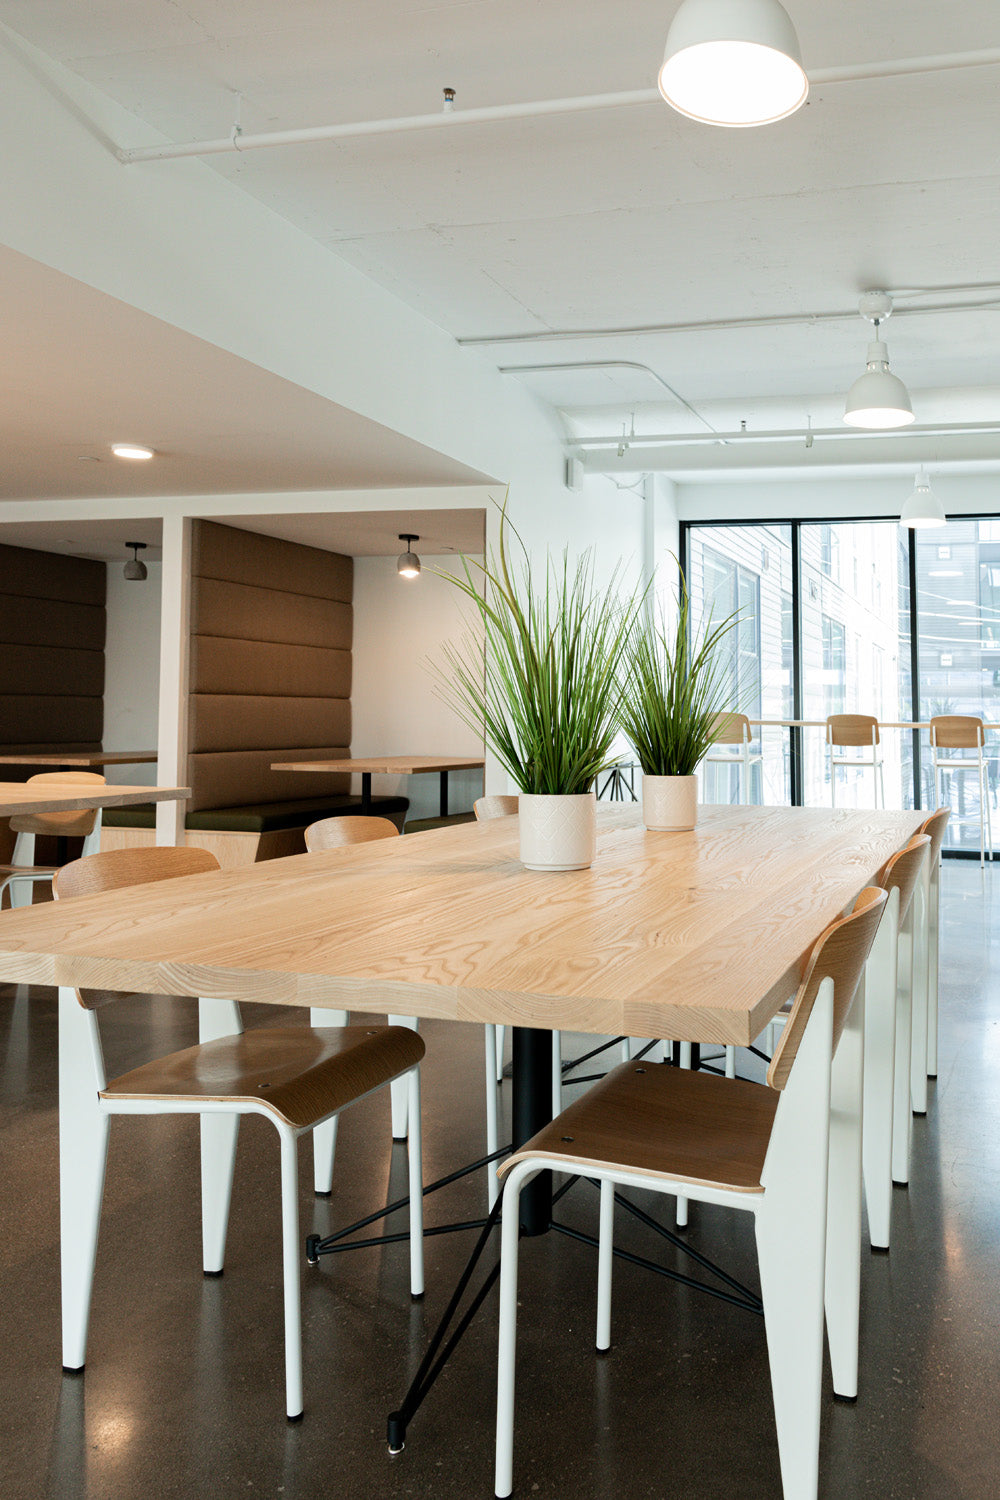 conference table, coworking furniture, amenity space furniture